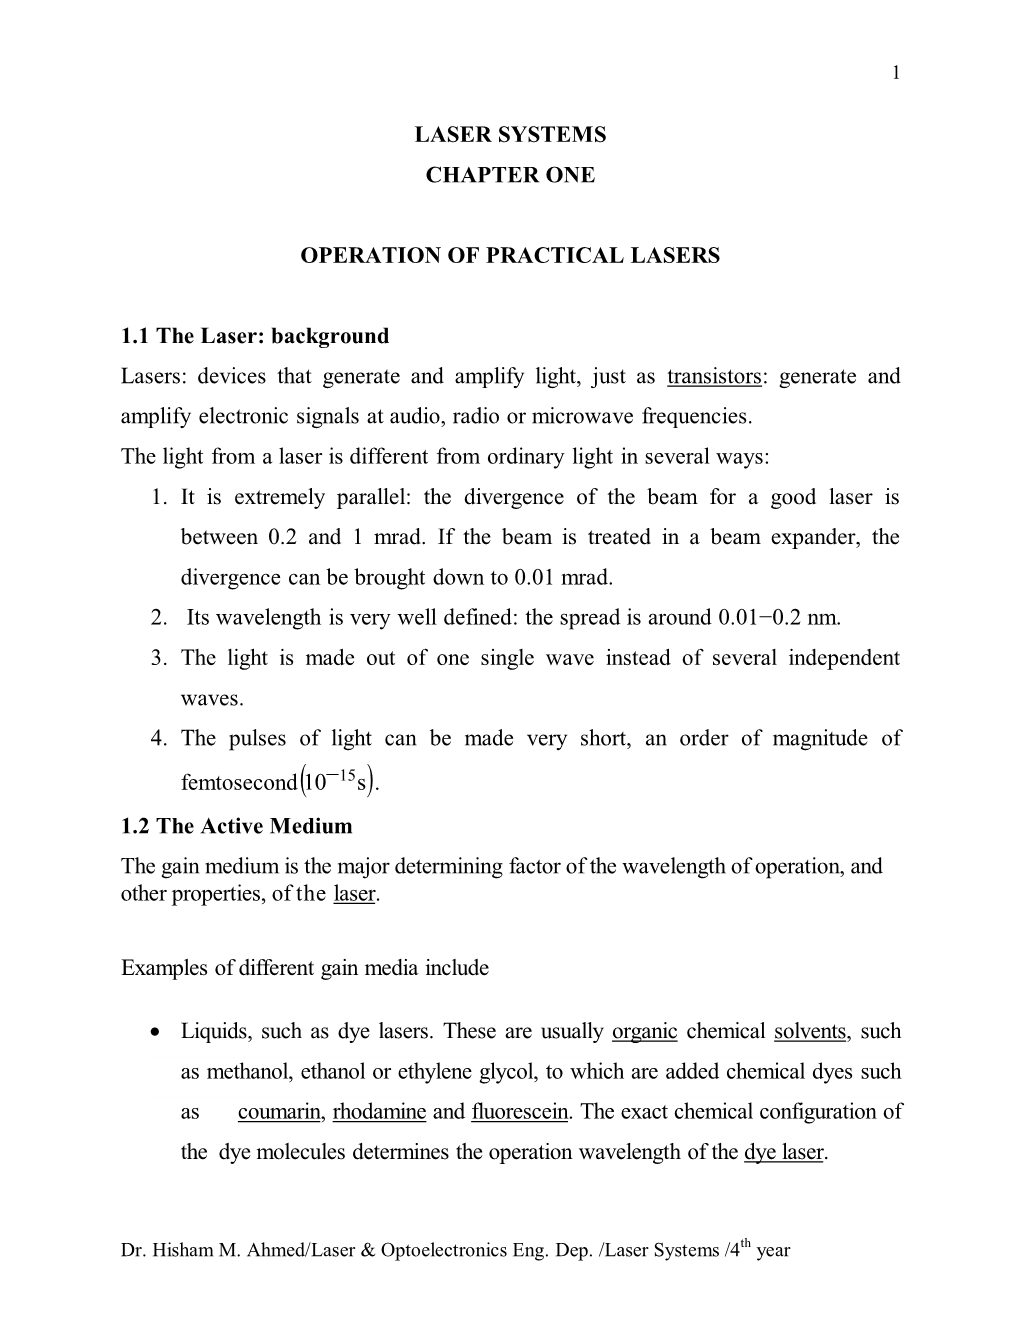 LASER SYSTEMS CHAPTER ONE OPERATION of PRACTICAL LASERS 1.1 the Laser: Background Lasers: Devices That Generate and Amplify Ligh